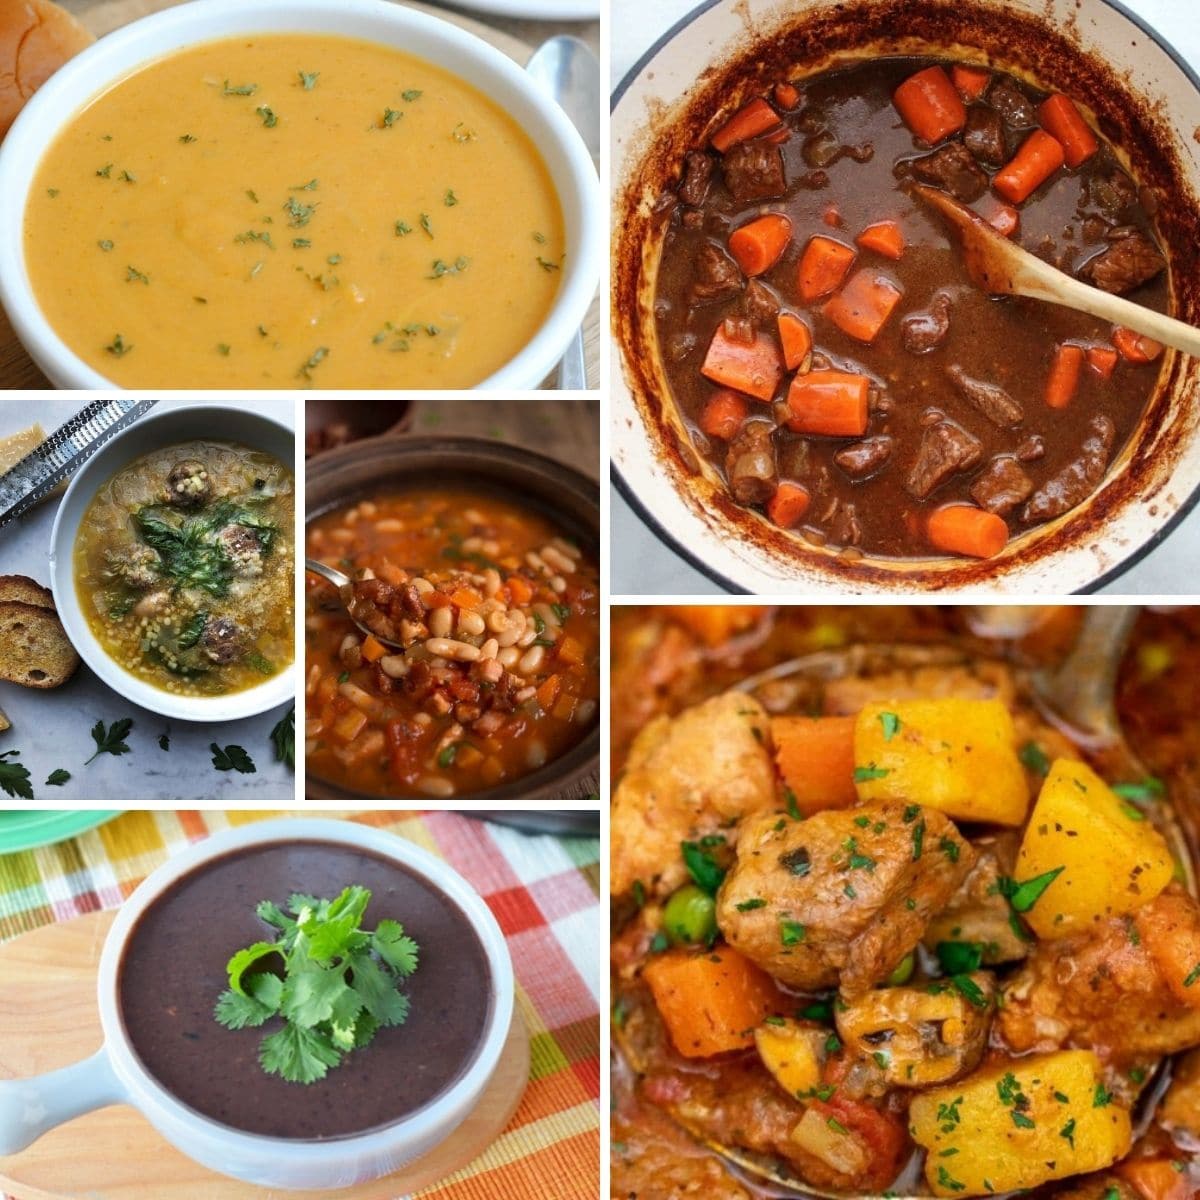 Soups and stews collage